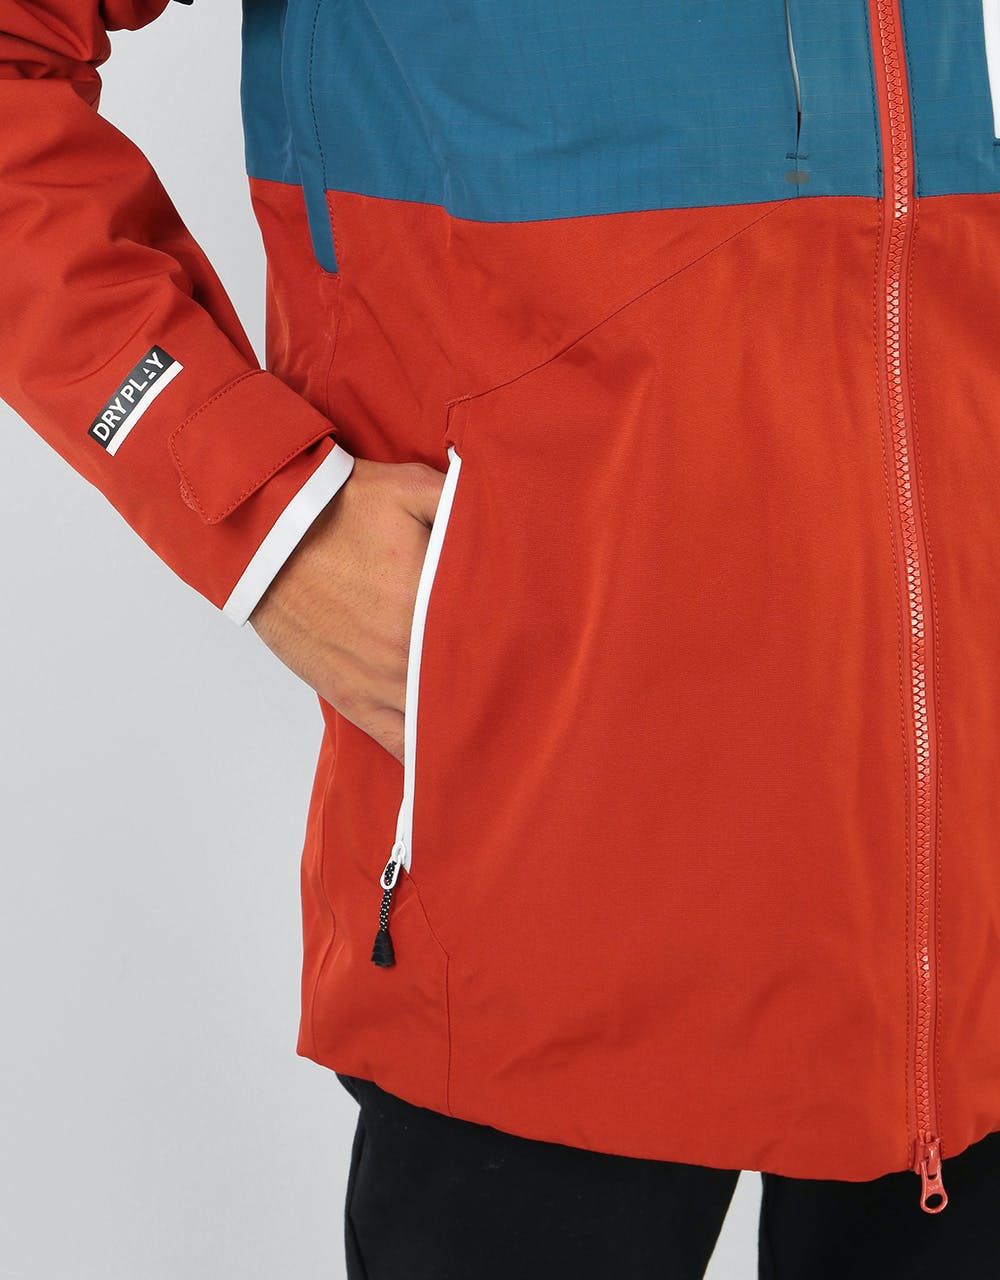 Picture Stone 2020 Snowboard Jacket - Petrol Blue